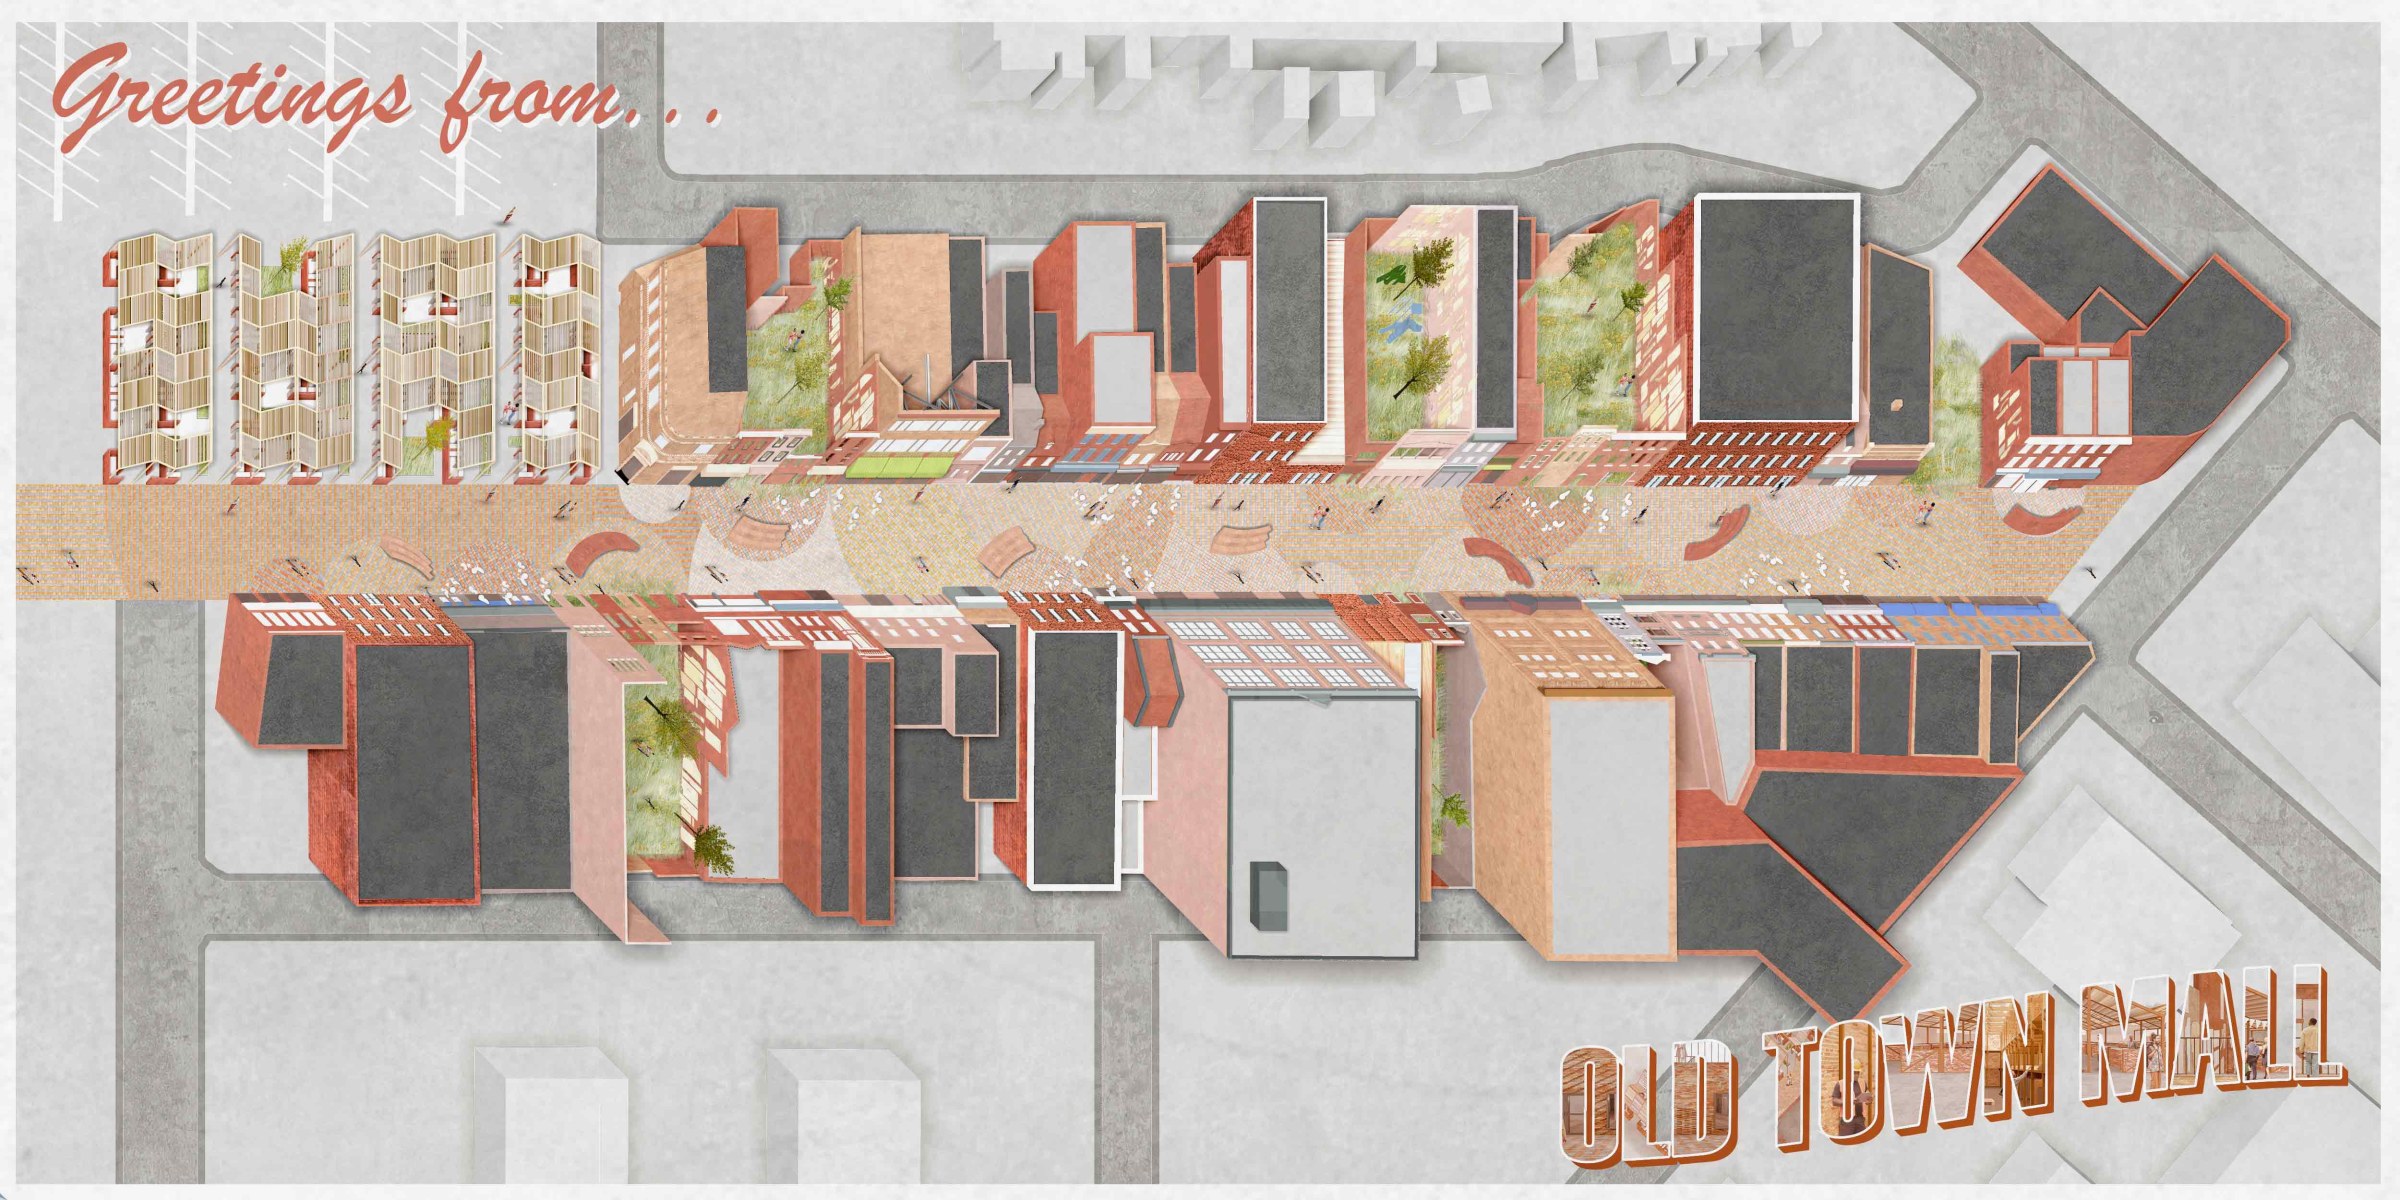 Alex Langley and Sam Spencer's Thesis Project post card plan view of Old Town Mall